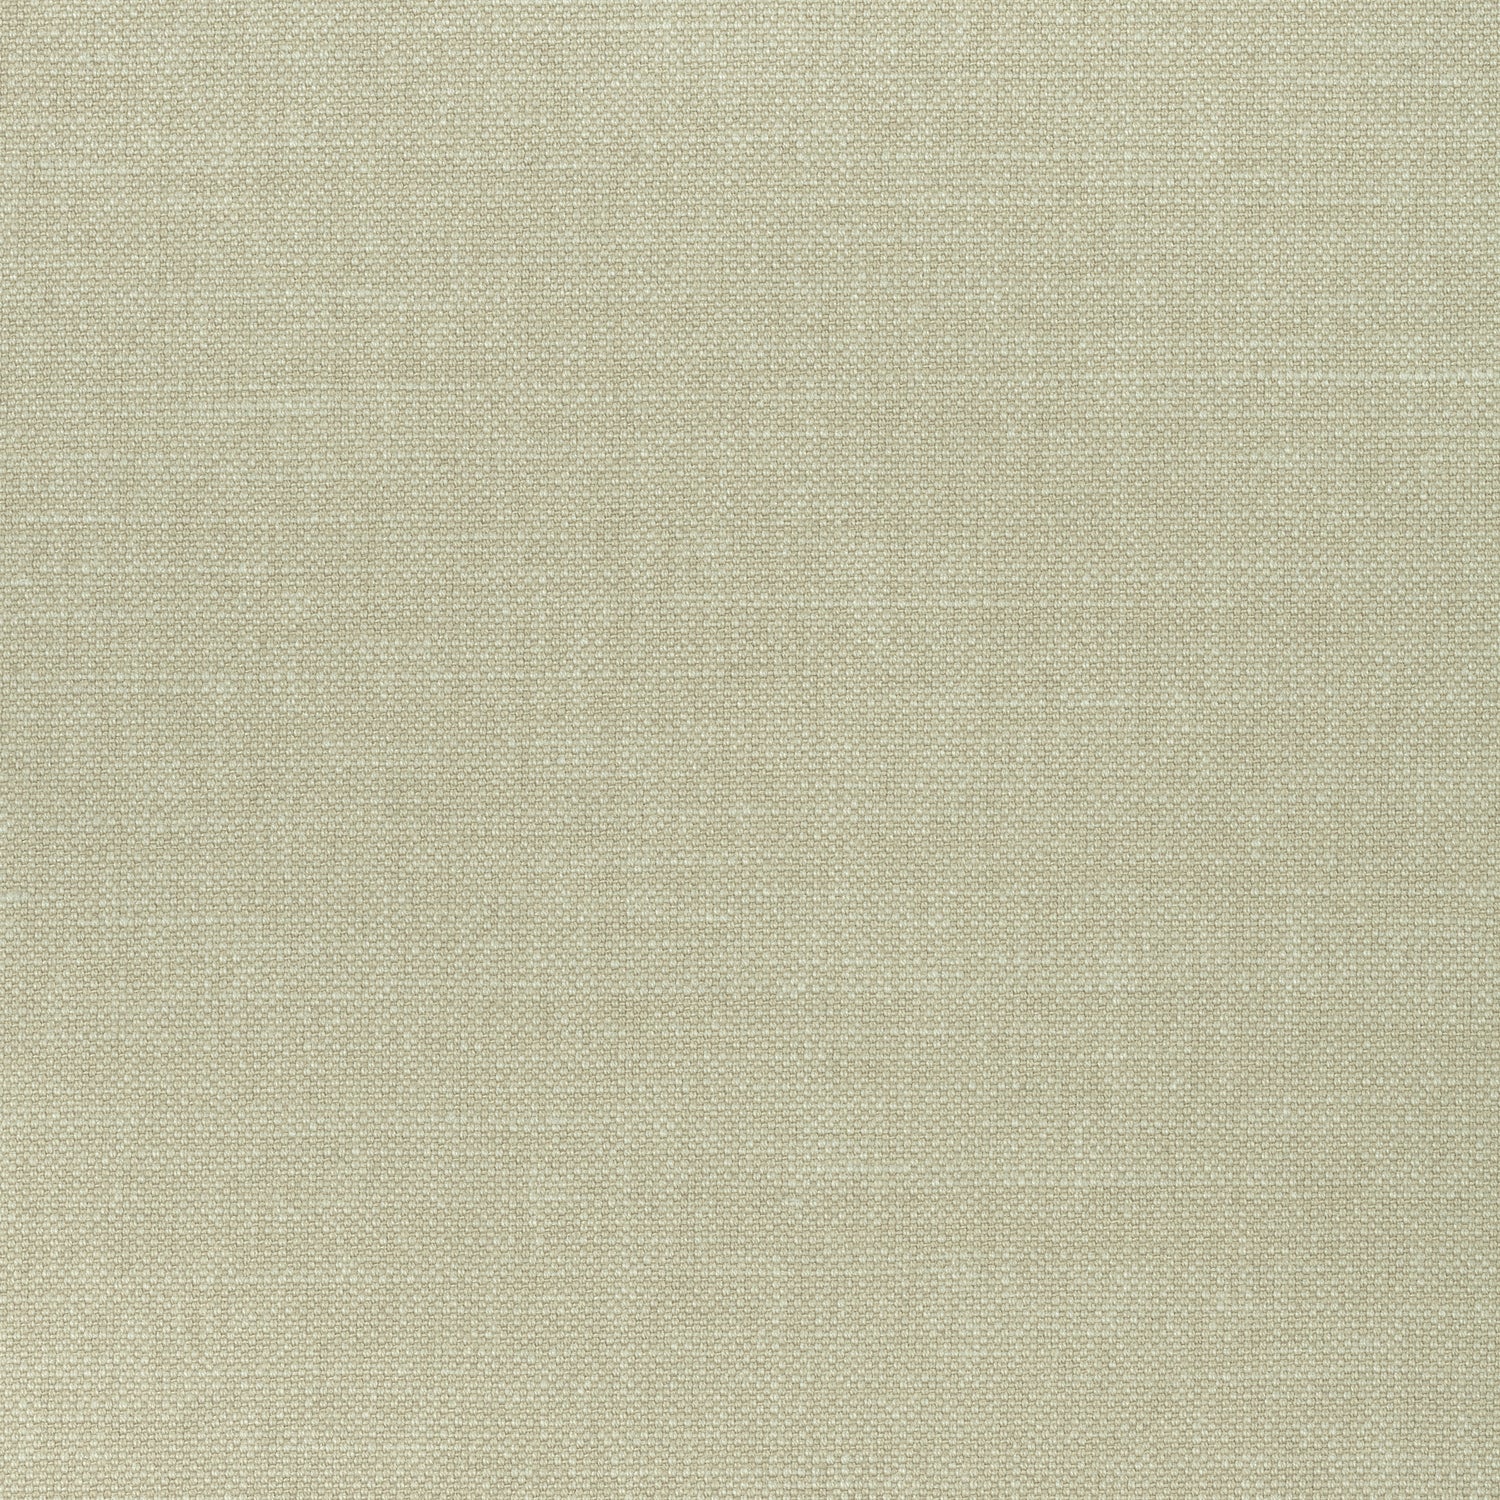 Prisma fabric in stone color - pattern number W70108 - by Thibaut in the Woven Resource Vol 12 Prisma Fabrics collection